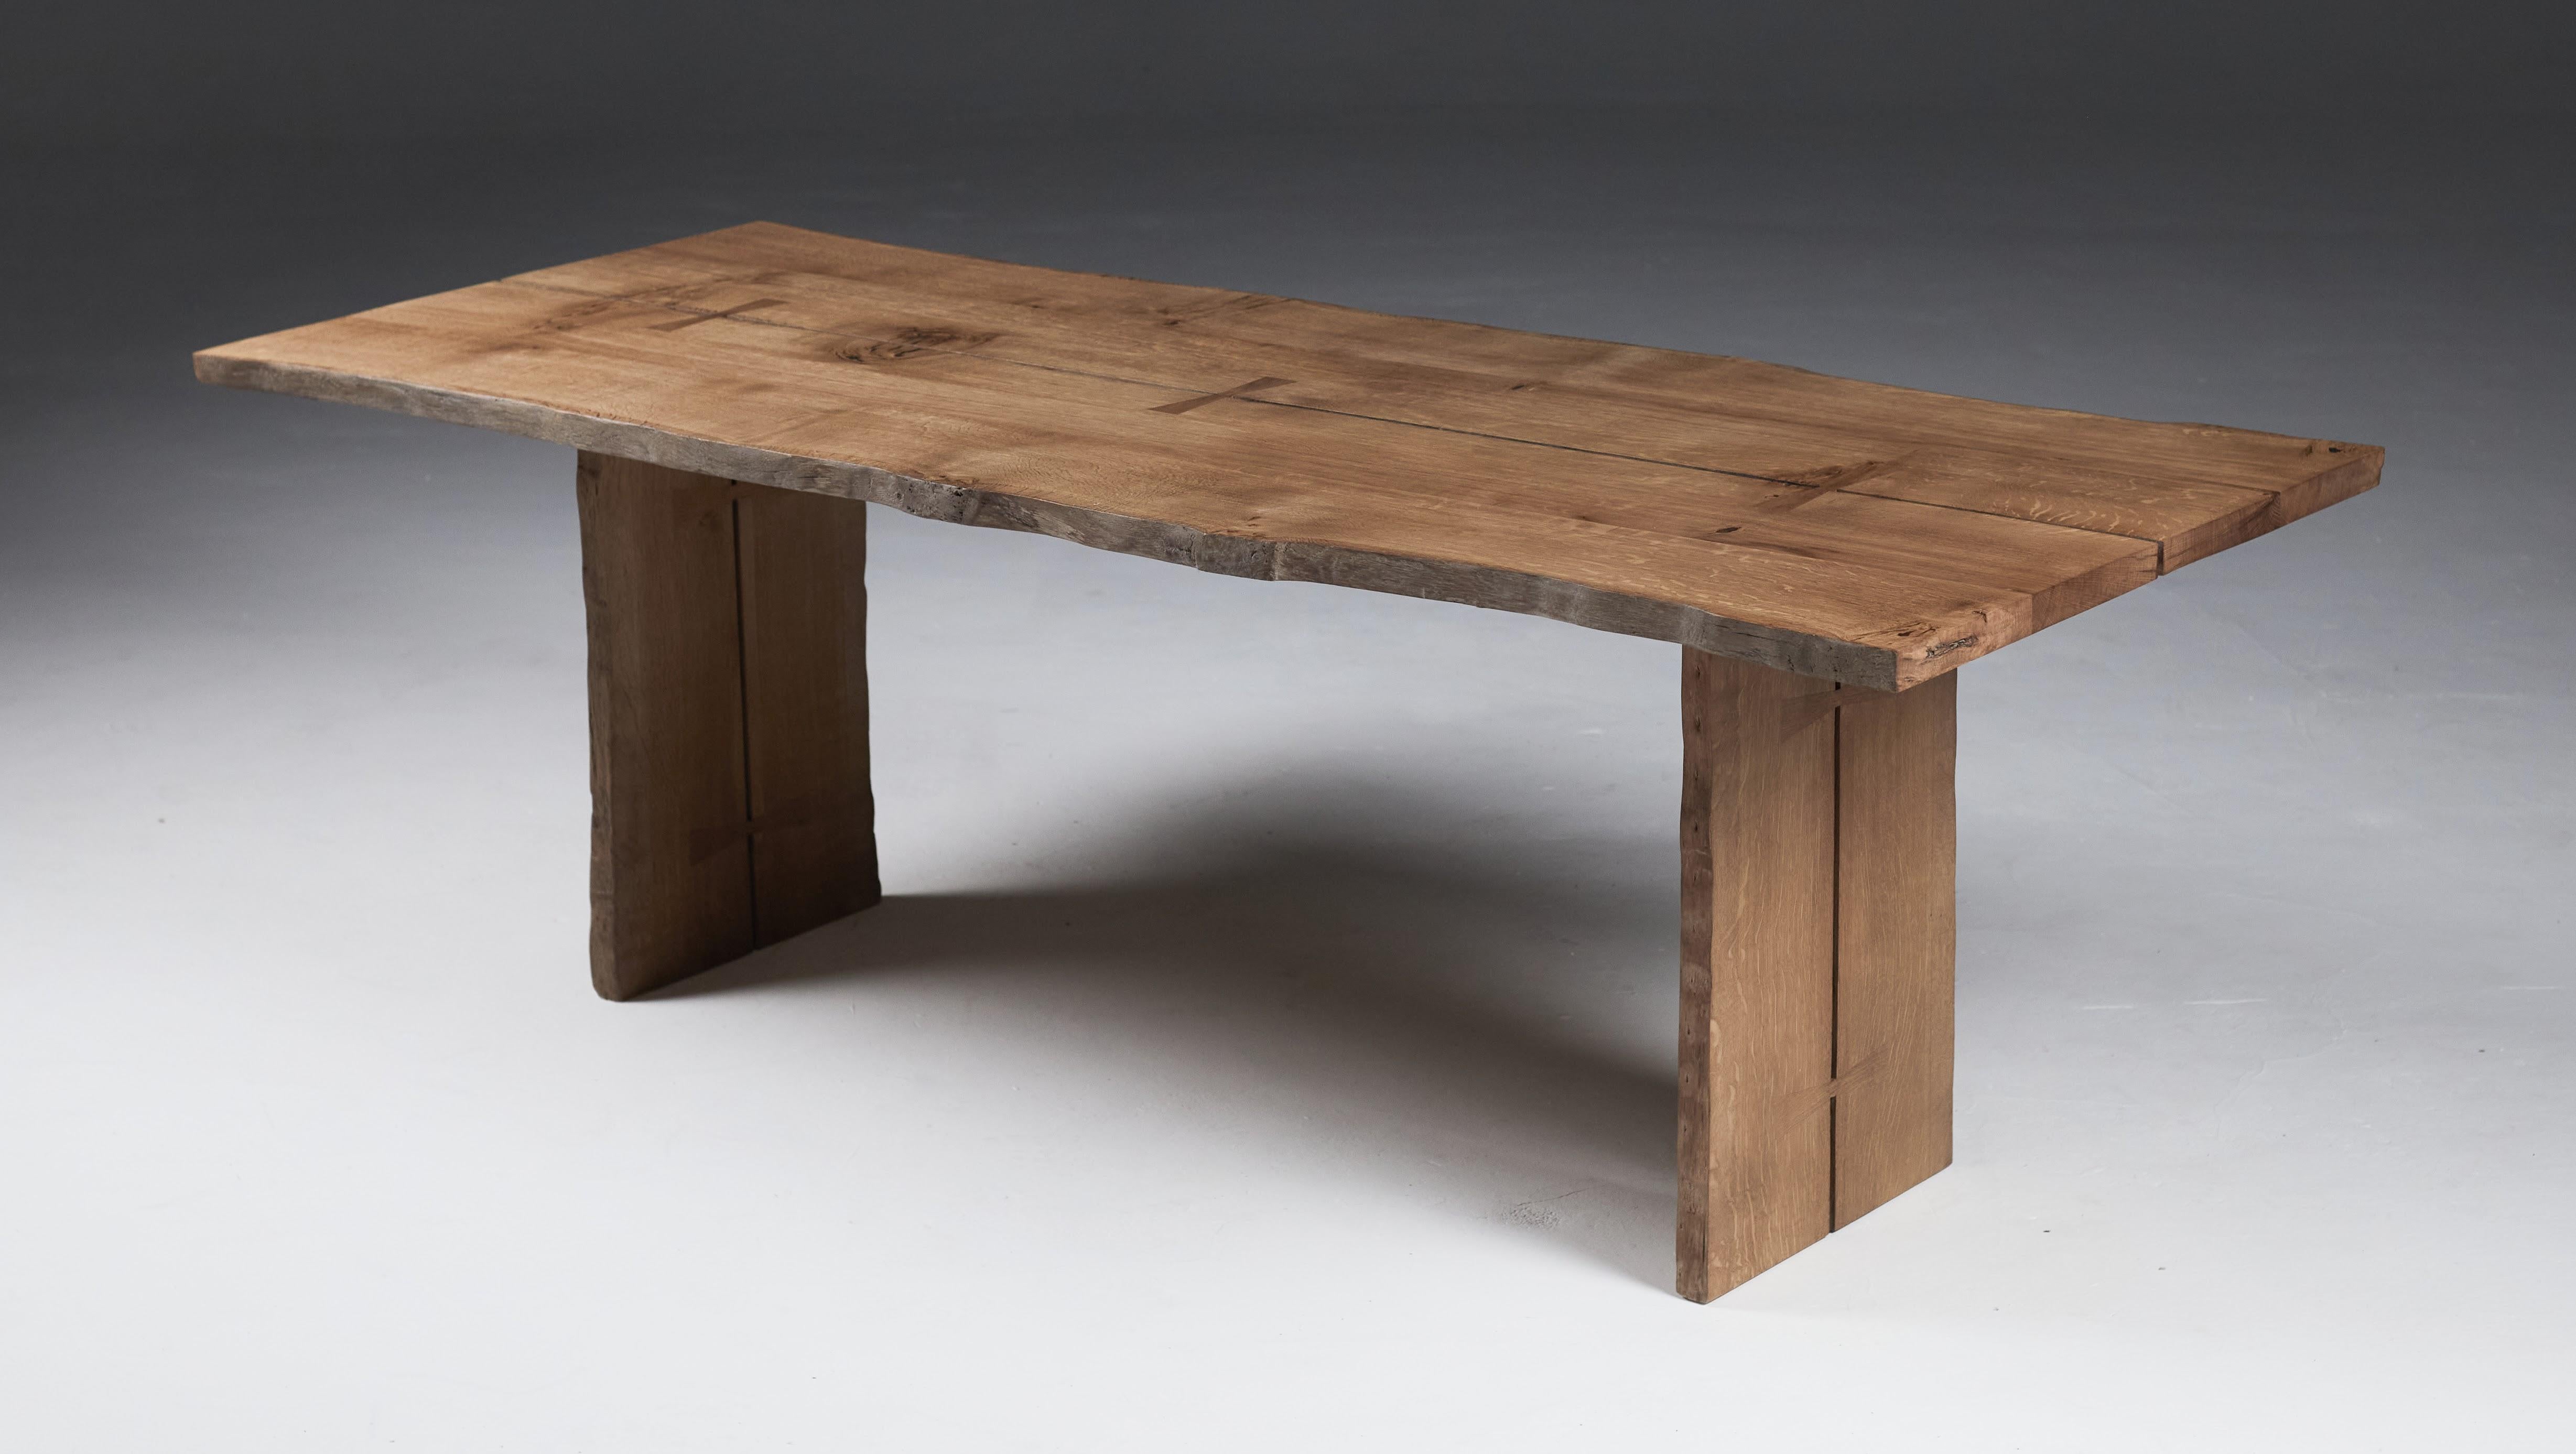 Organic Modern The 'Additions' butterfly joined table with live-edge English Oak.